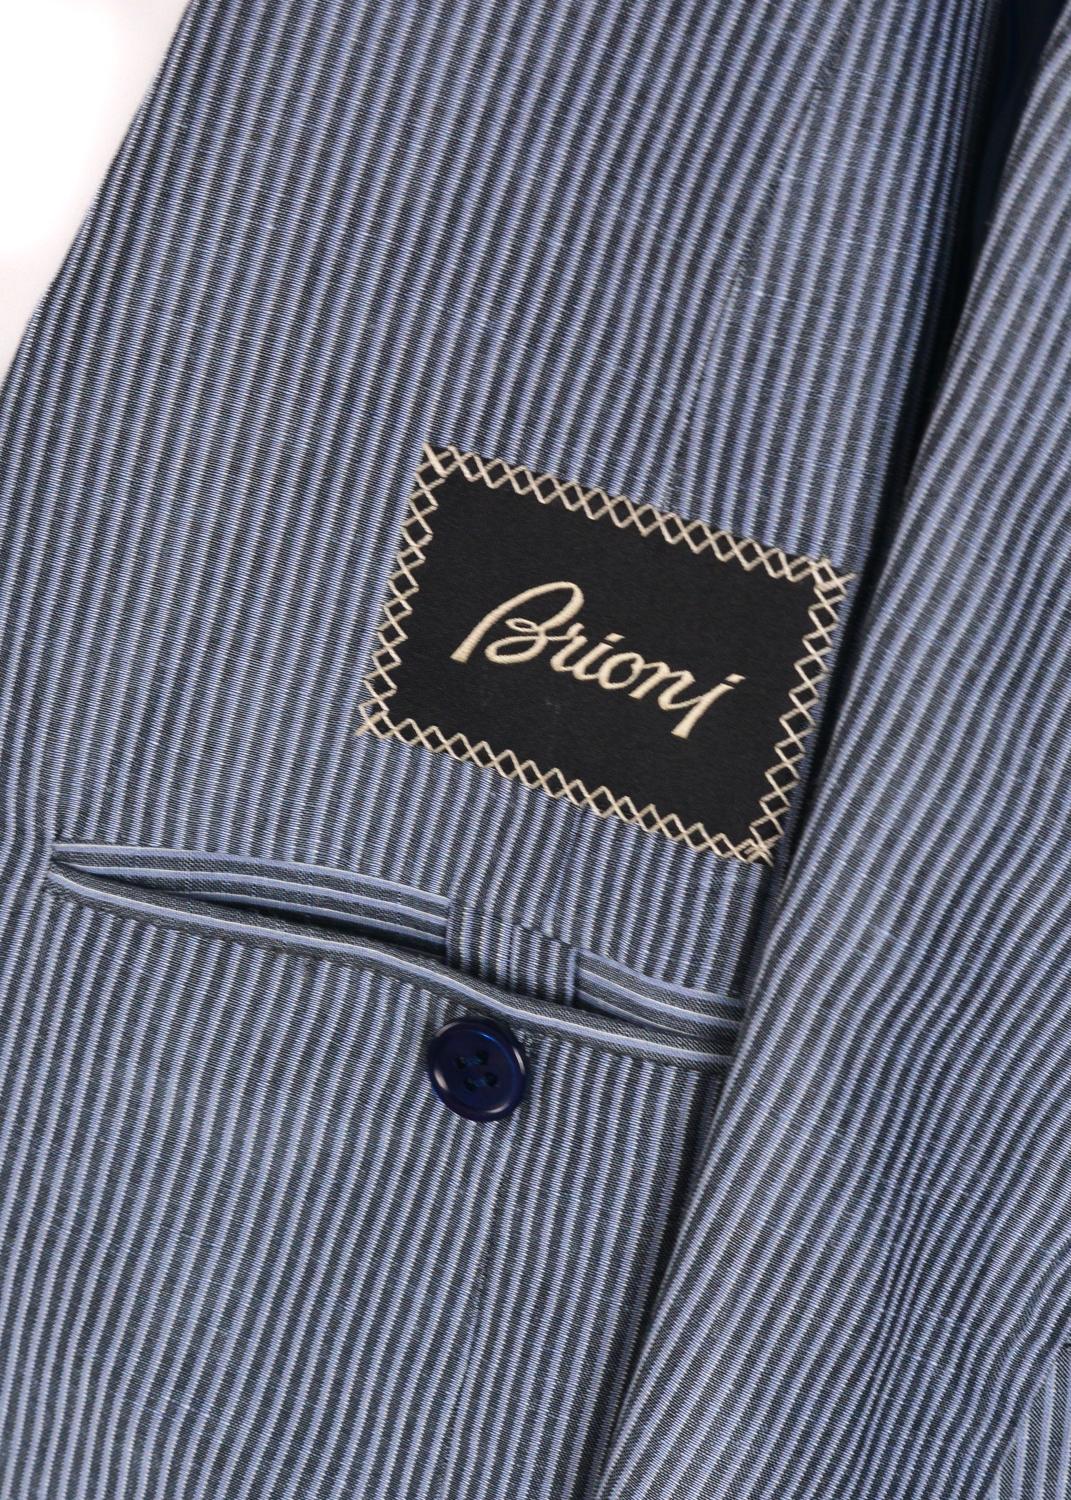 Every man should have the privilege of owning a Brioni Piuma Sportcoat. This 6000 meticulously stitched blue striped unit is perfect for that airy day event. Allow the harmonious blend of linen and silk to compliment and sculpt your frame in motion.